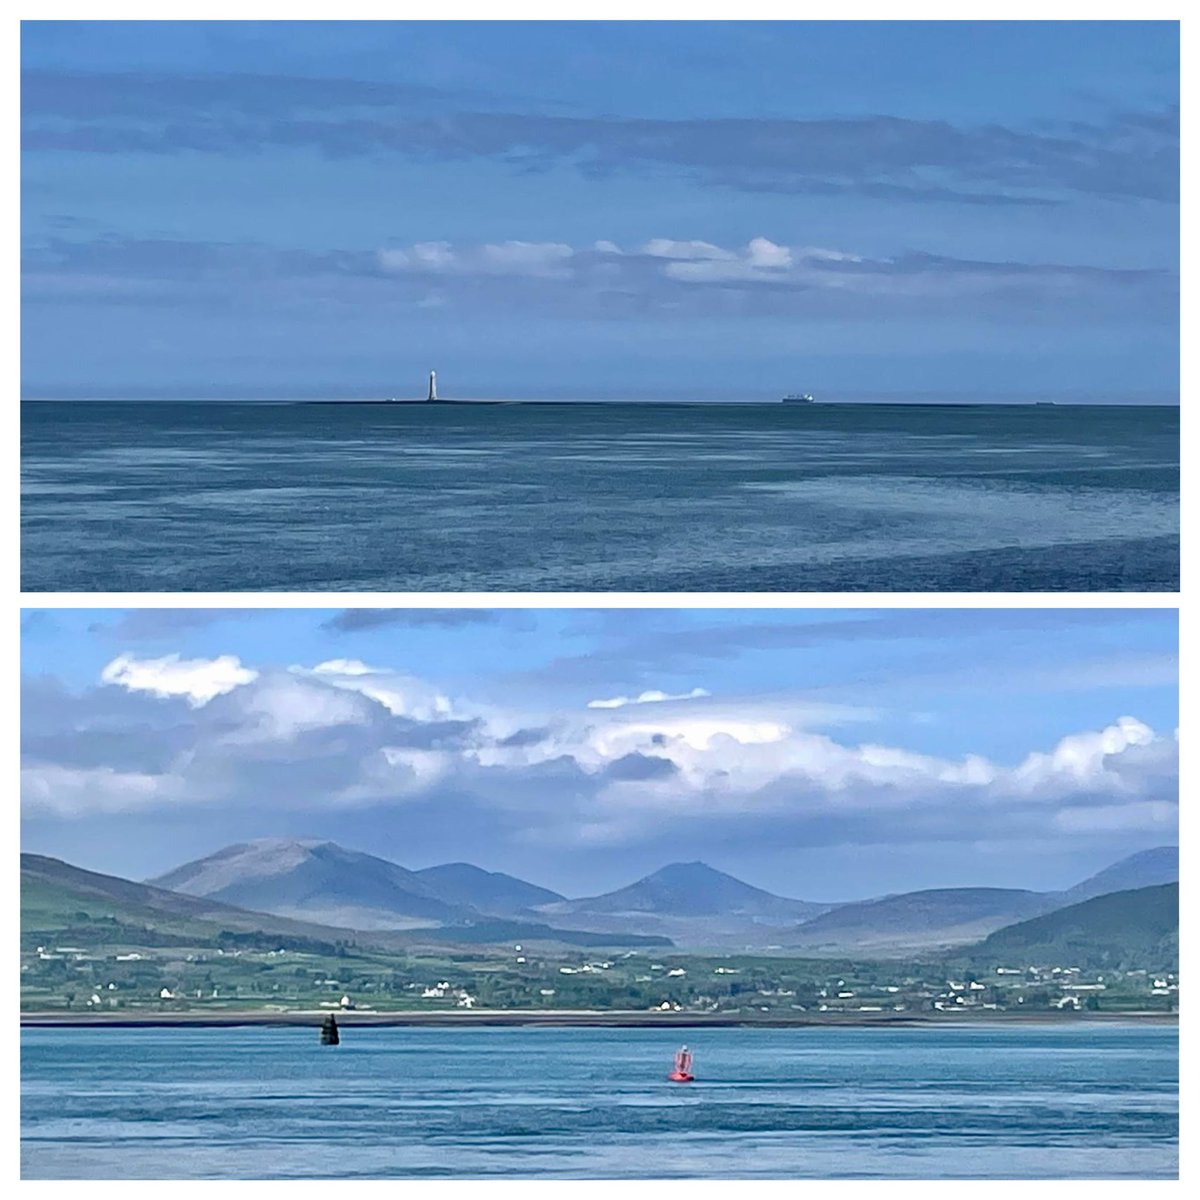 Definitely some good signs of Summer this afternoon - Carlingford Lough from Greenore!